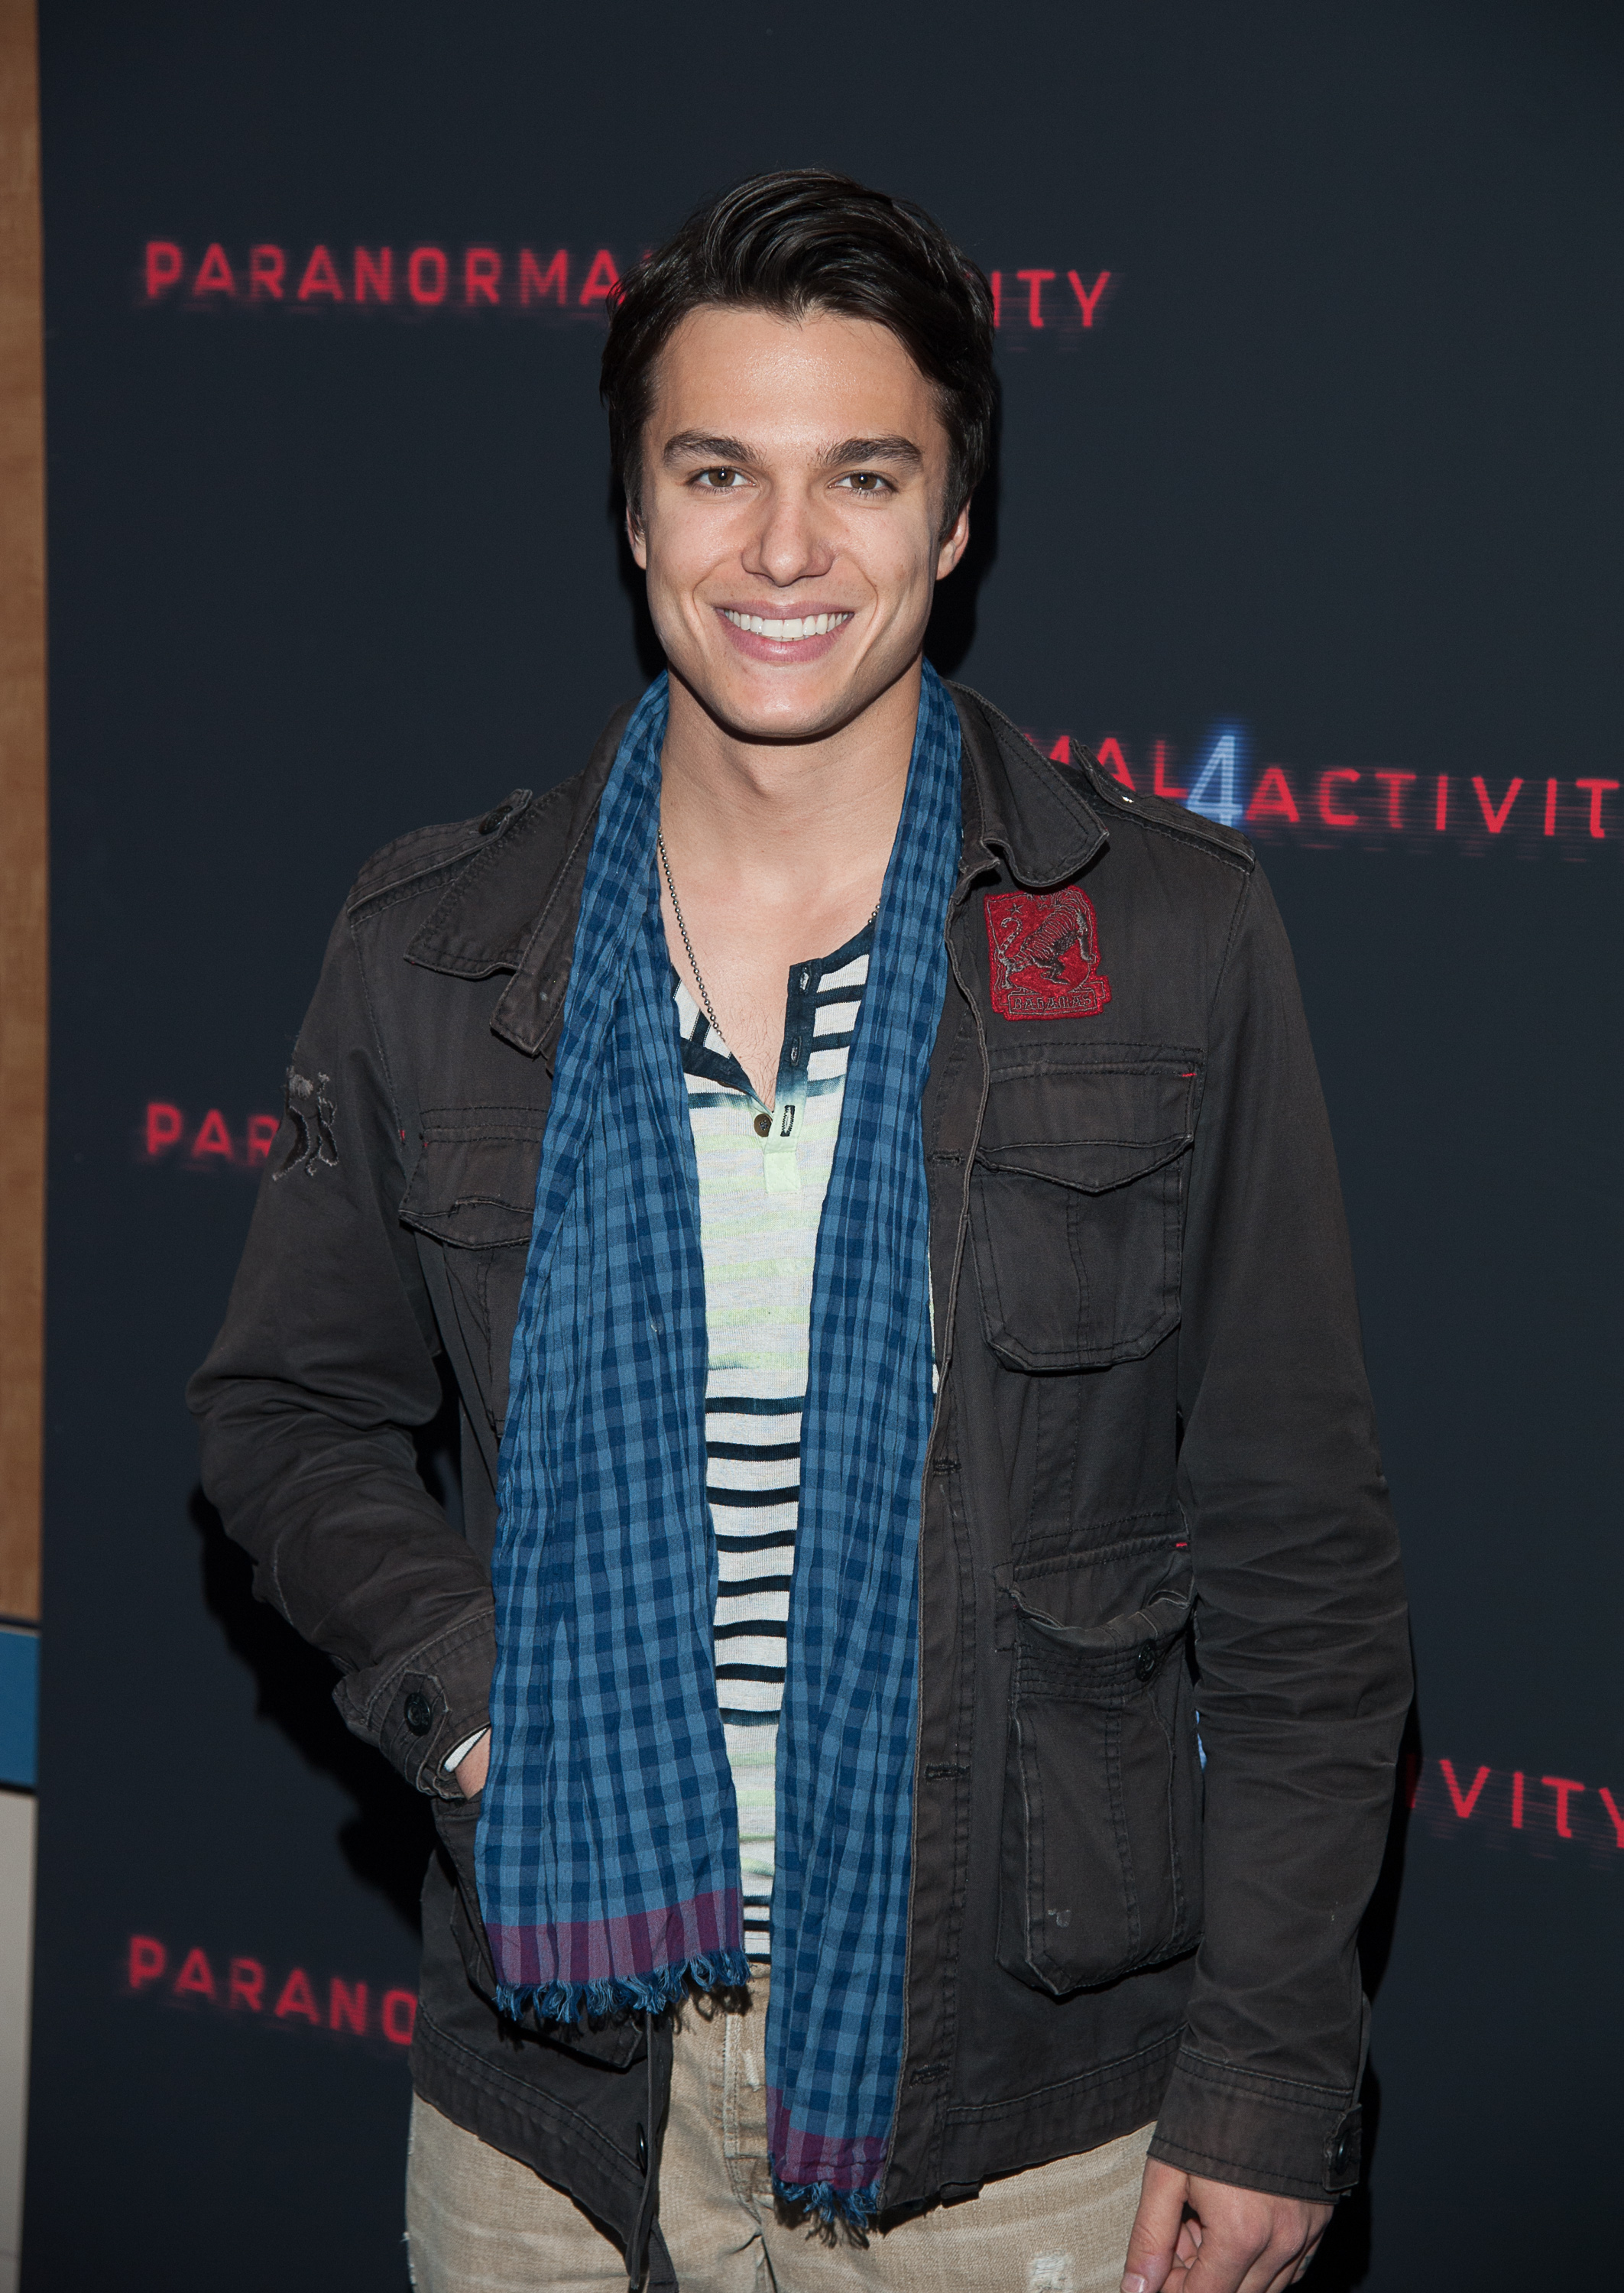 Chris Riggi attends the "Paranormal Activity 4" New York Screening at Regal E-Walk Stadium 13 on October 16, 2012, in New York City. | Source: Getty Images